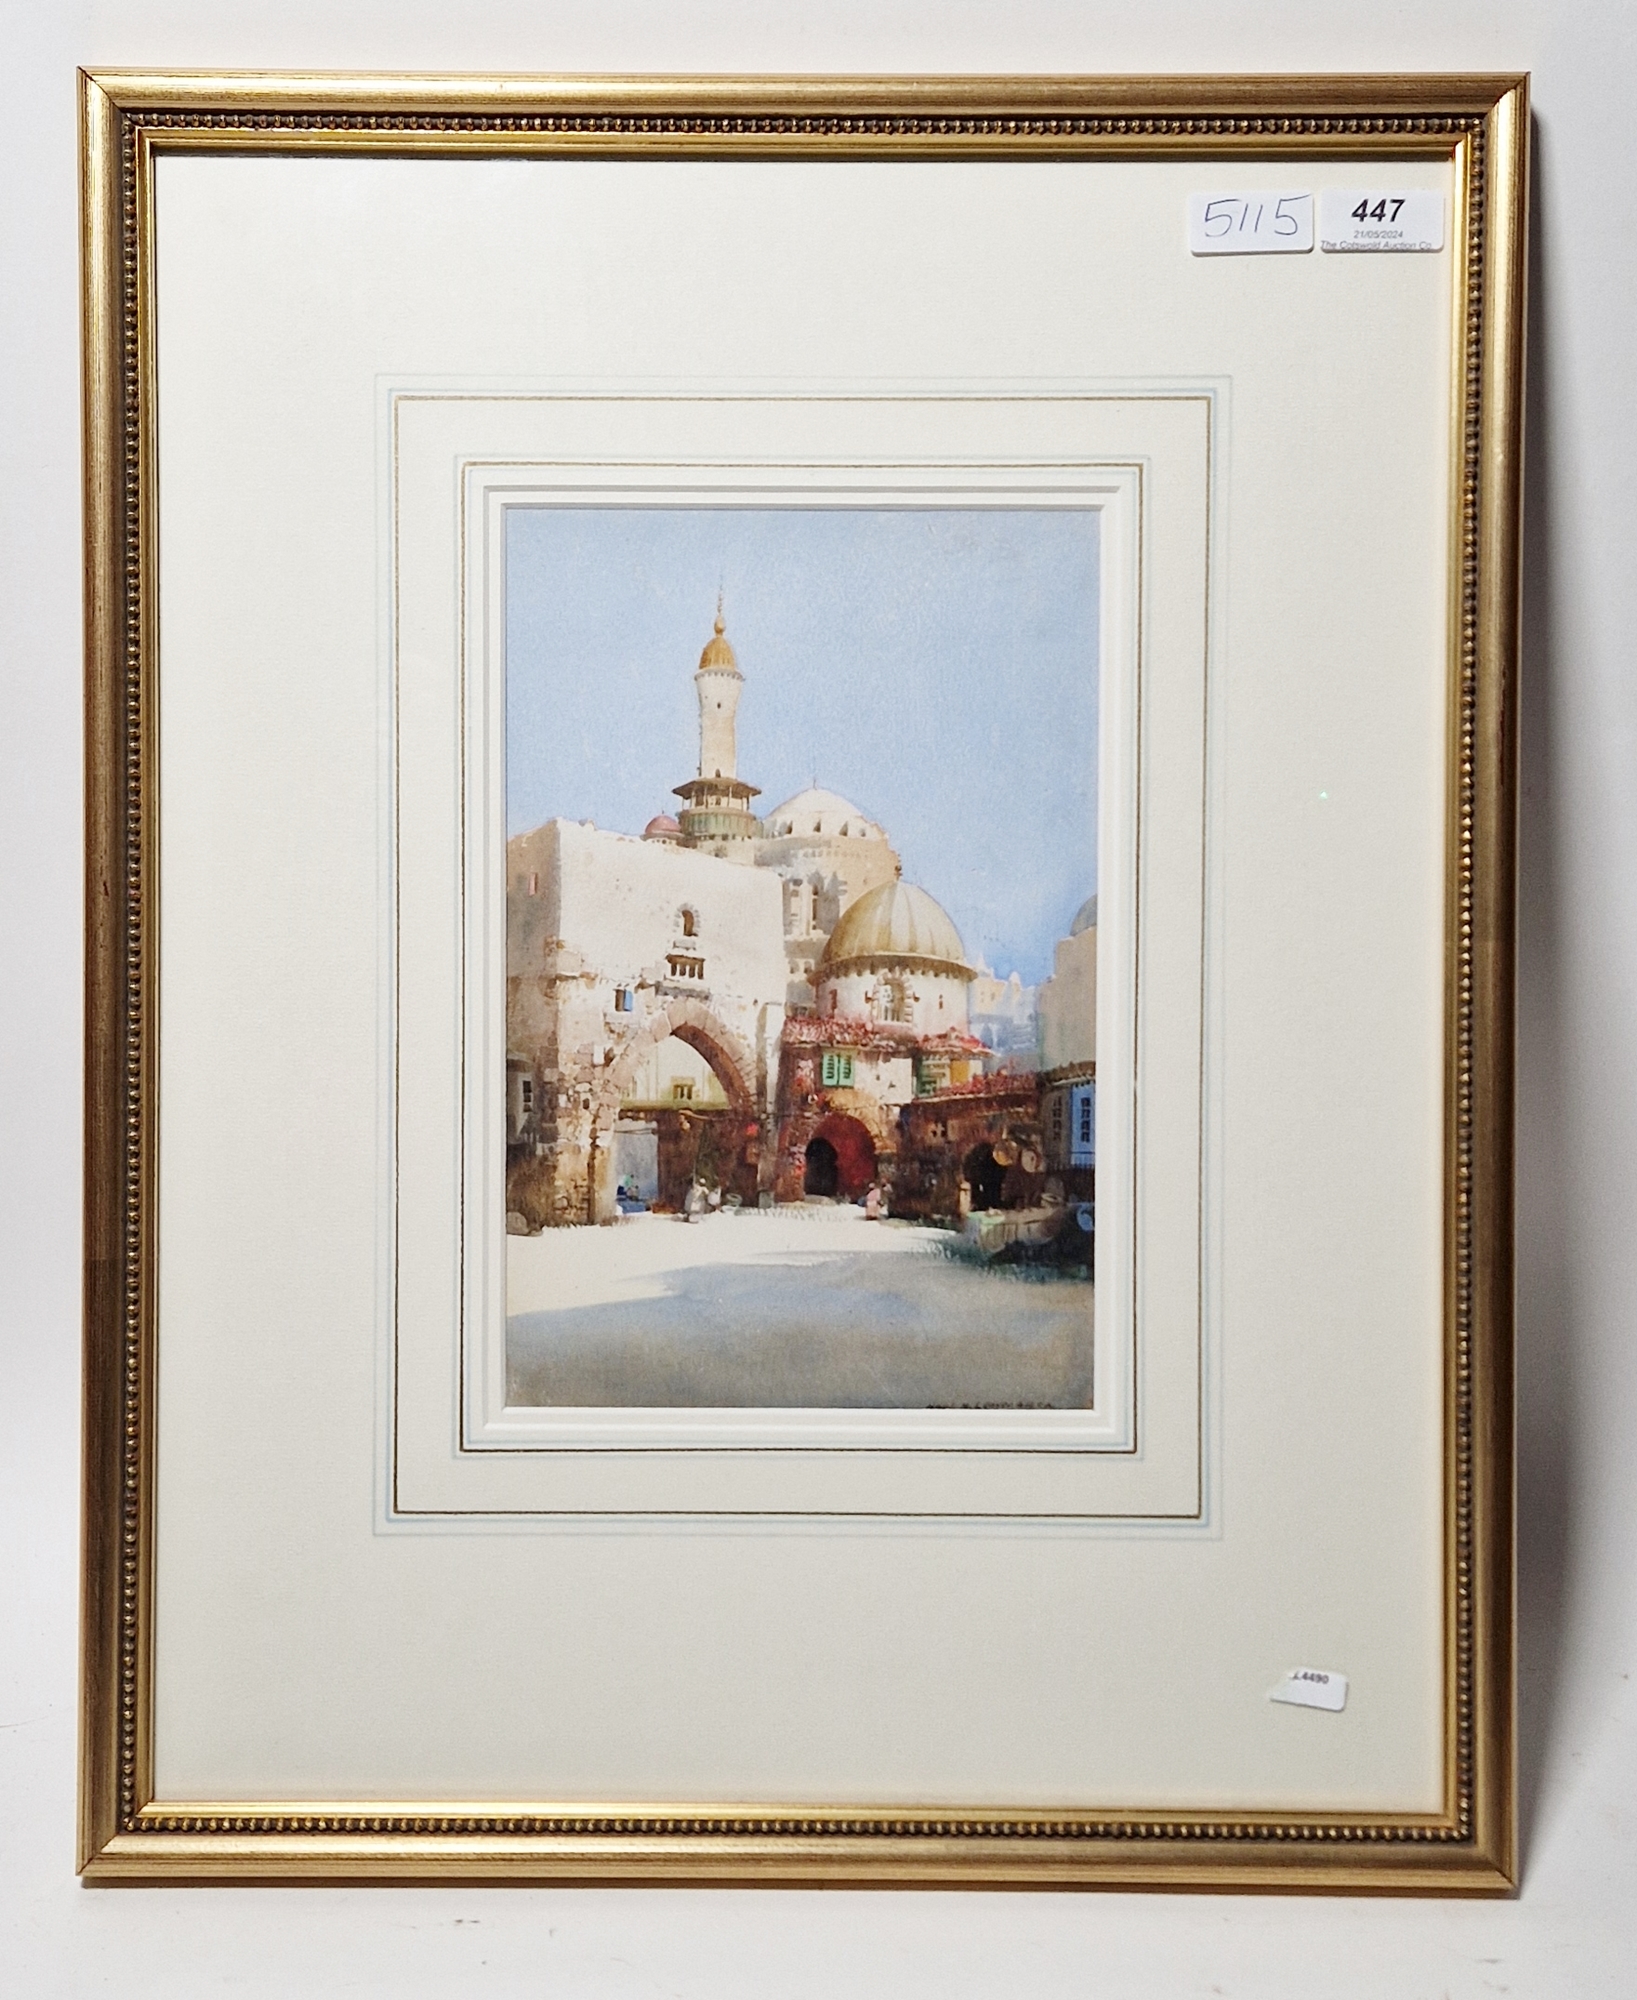 Noel Harry Leaver A.R.C.A. (1889-1951) Watercolour Moroccan street scene, signed lower right, framed - Image 2 of 3